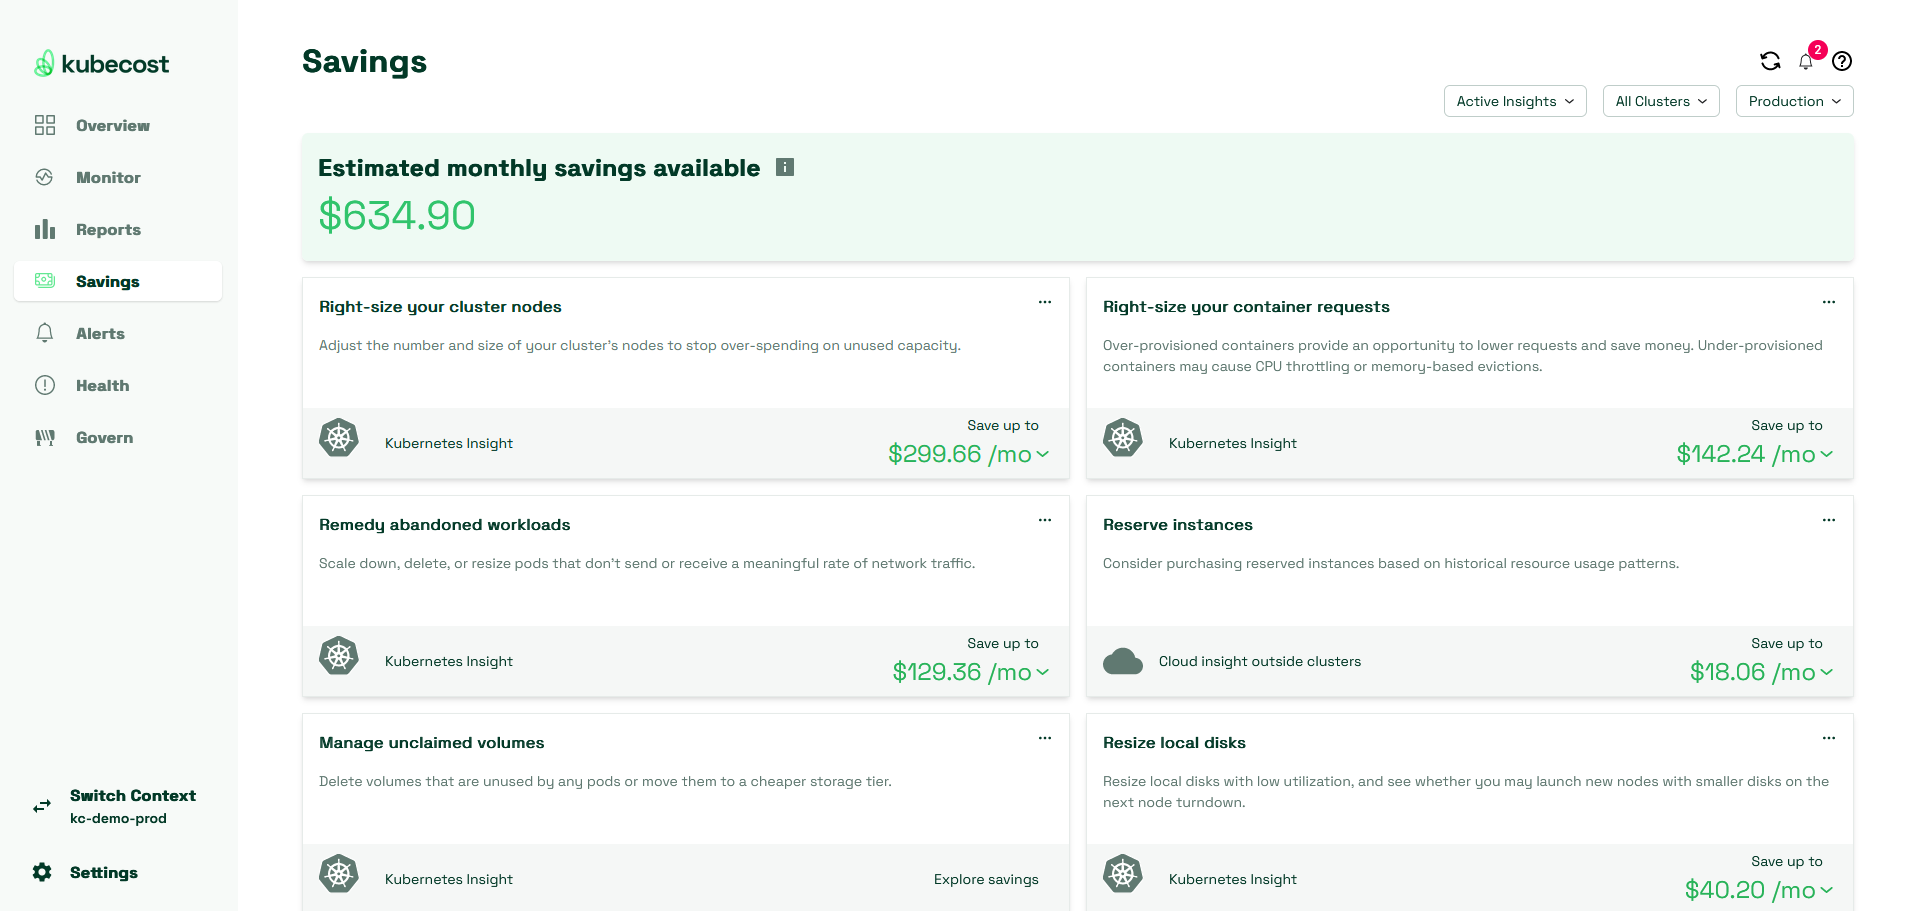 The Savings page shows you where Kubecost thinks you can save money by reclaiming or rightsizing resources.